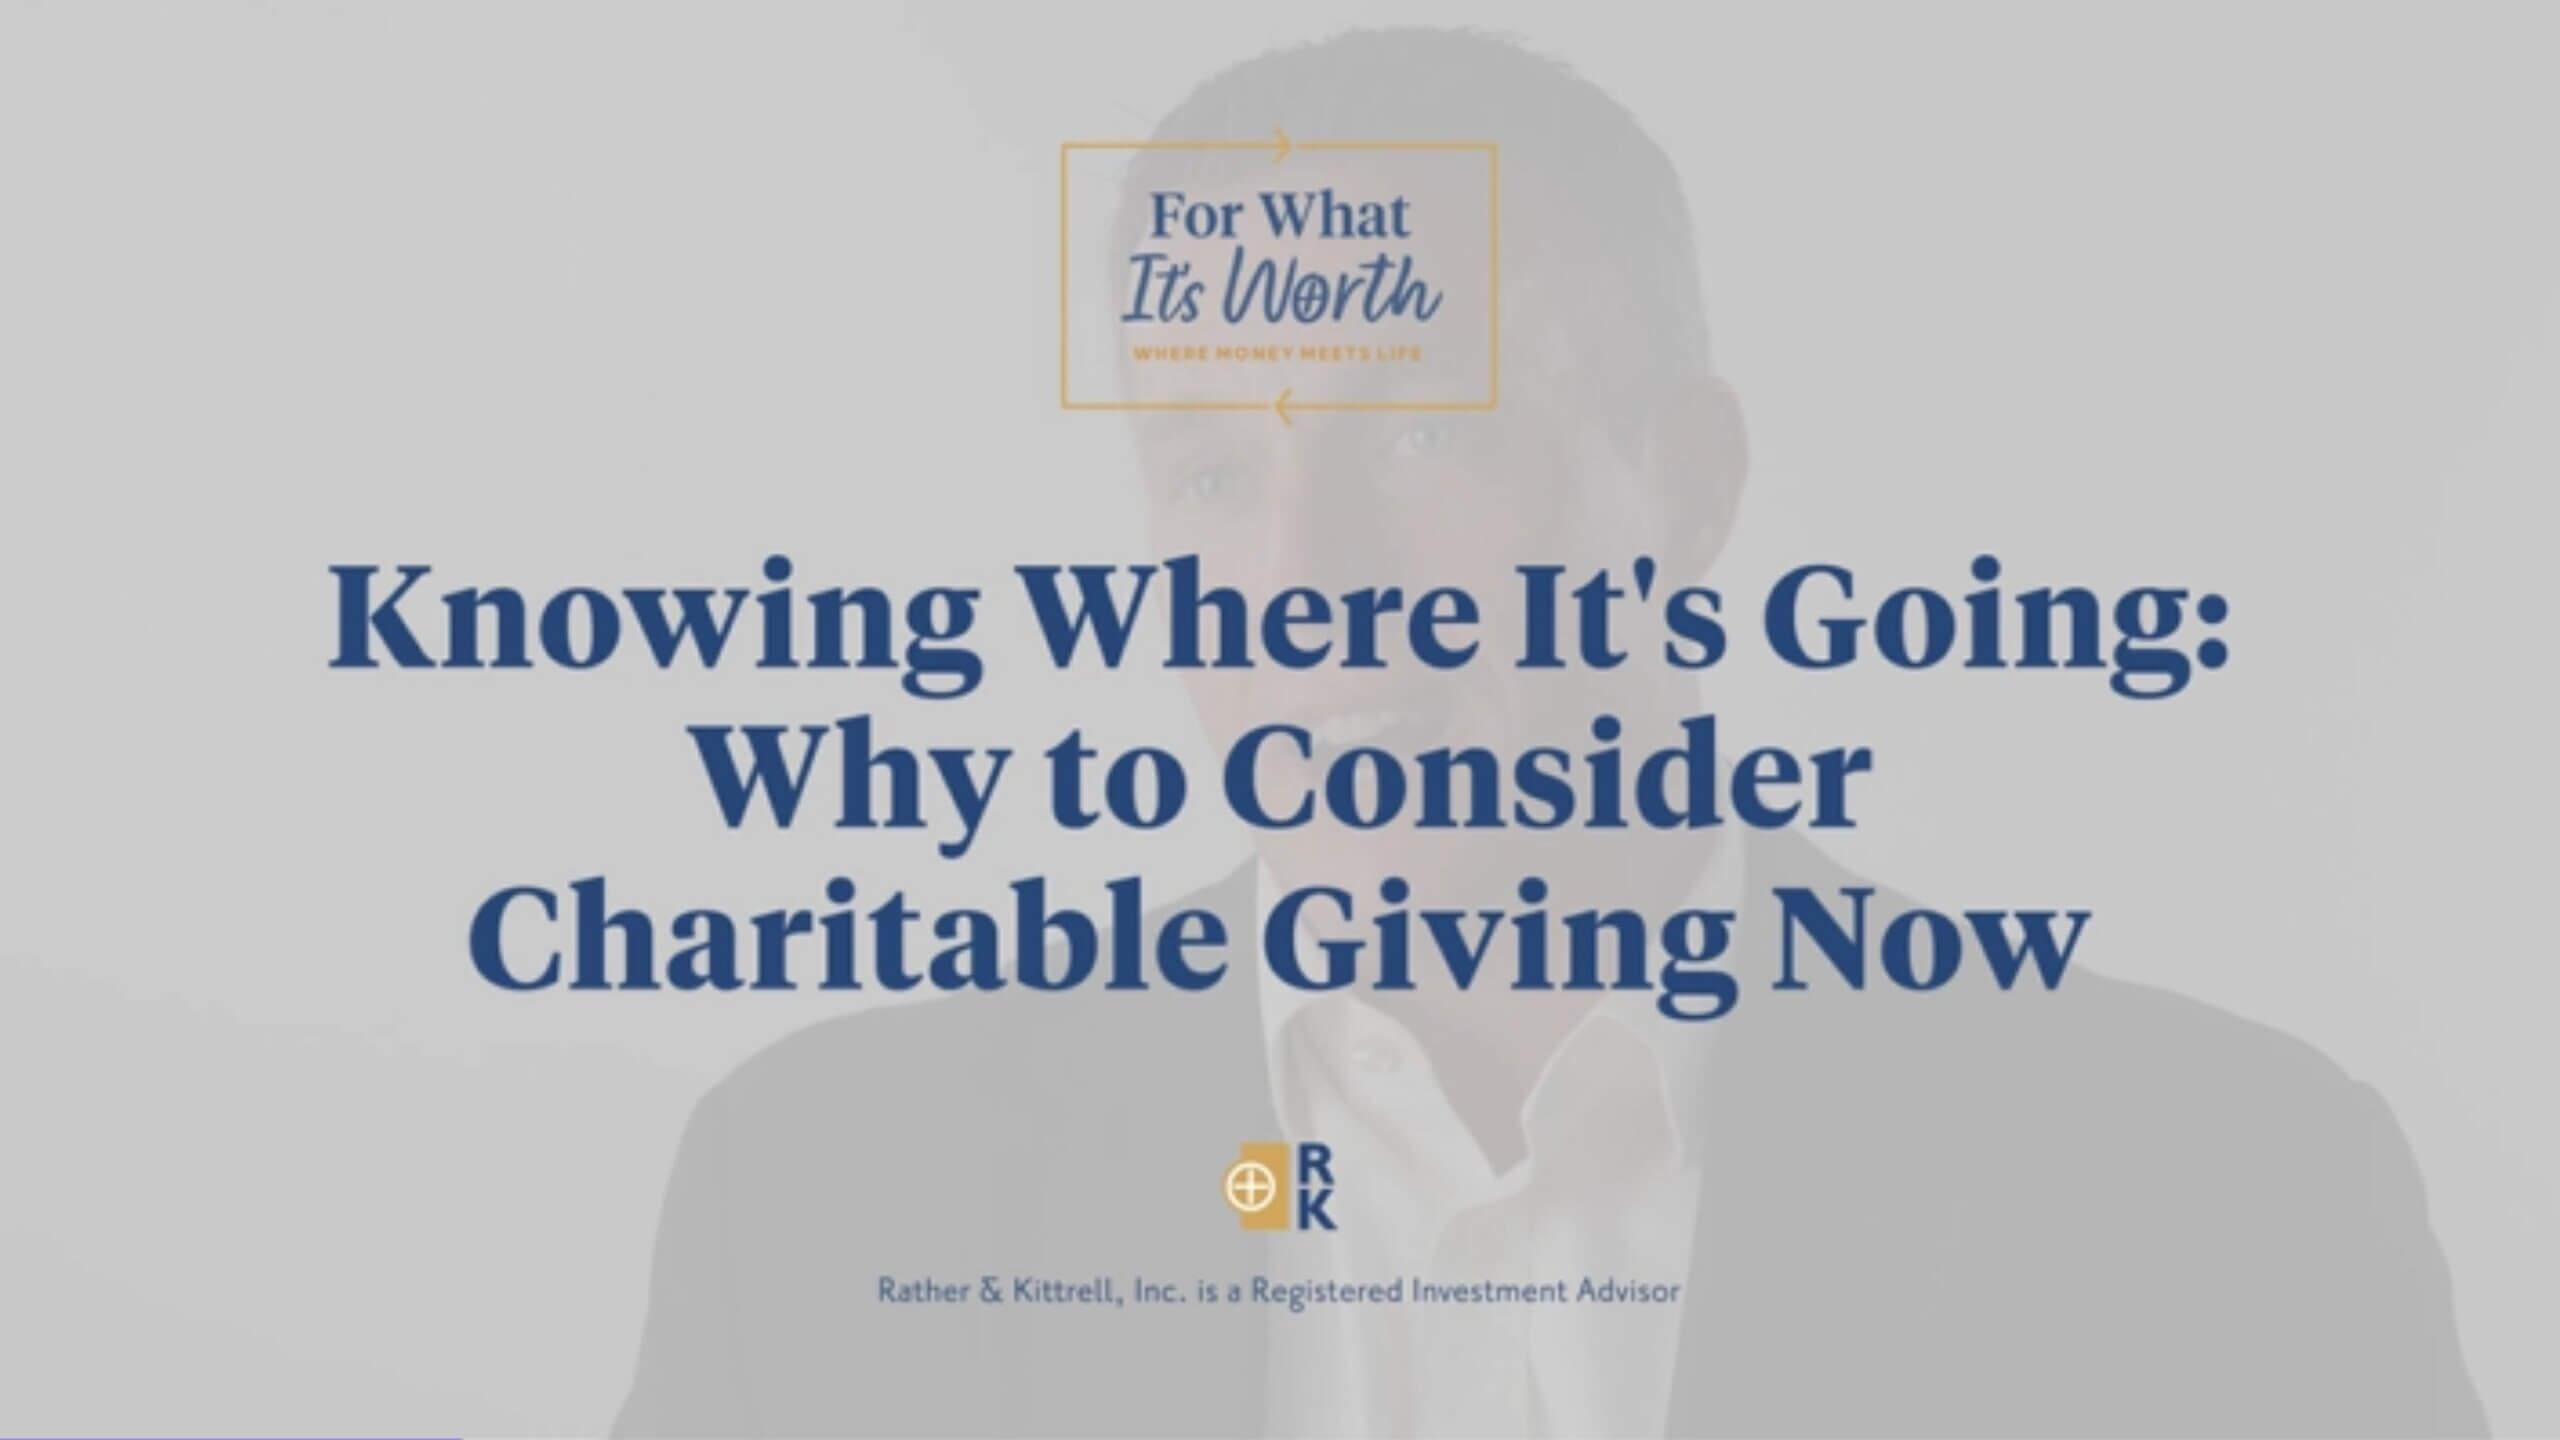 Knowing where it's going: why to consider charitable giving now